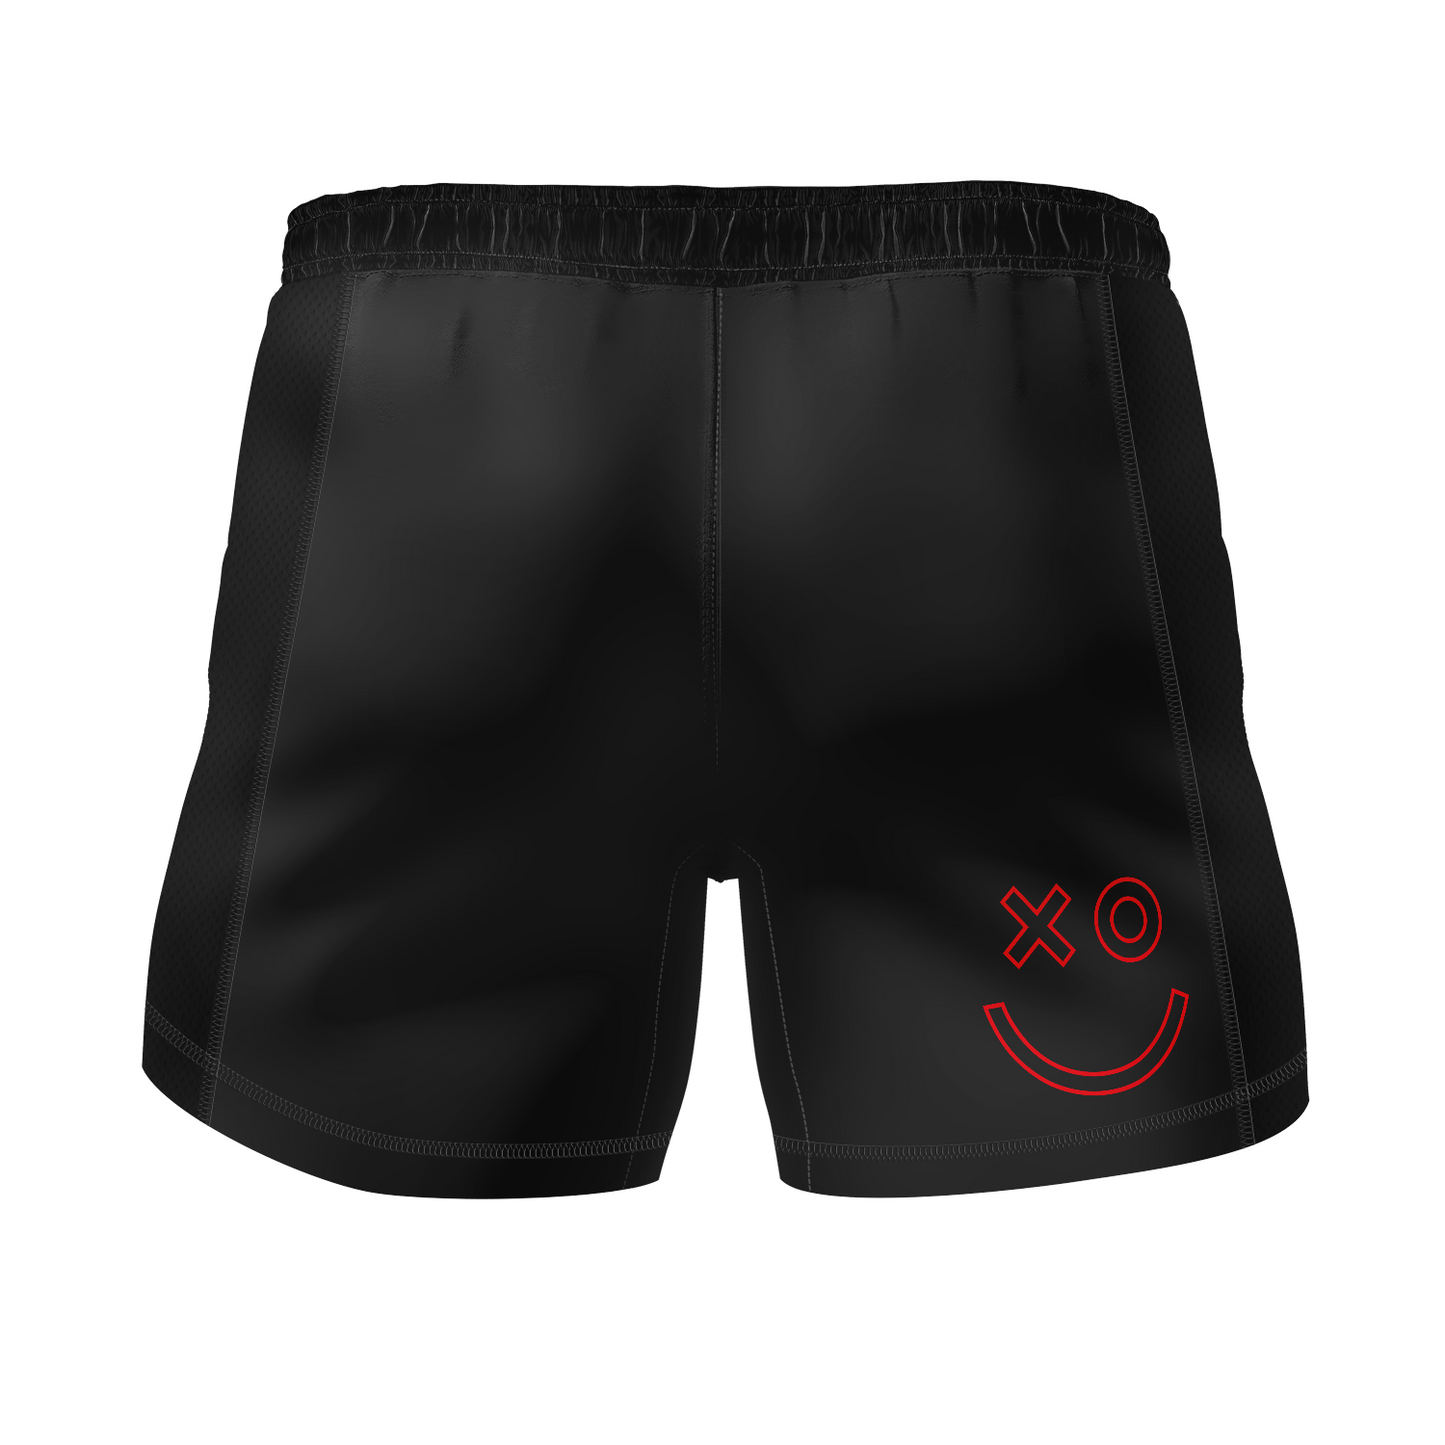 AJJ men's fight shorts The Staple, black and red